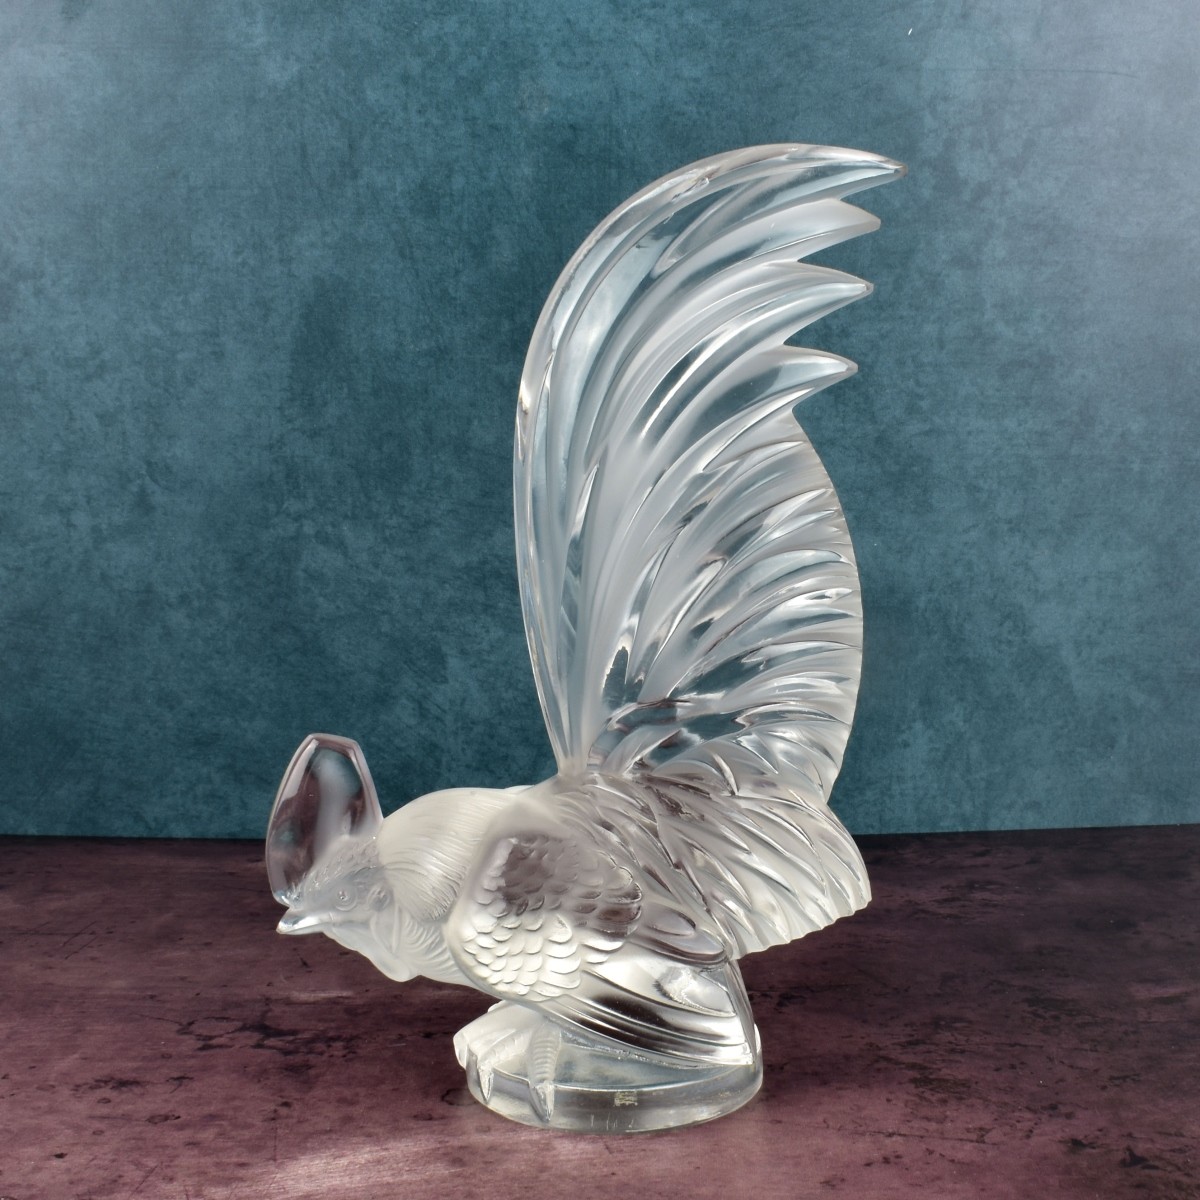 Pair Lalique Crystal Roosters